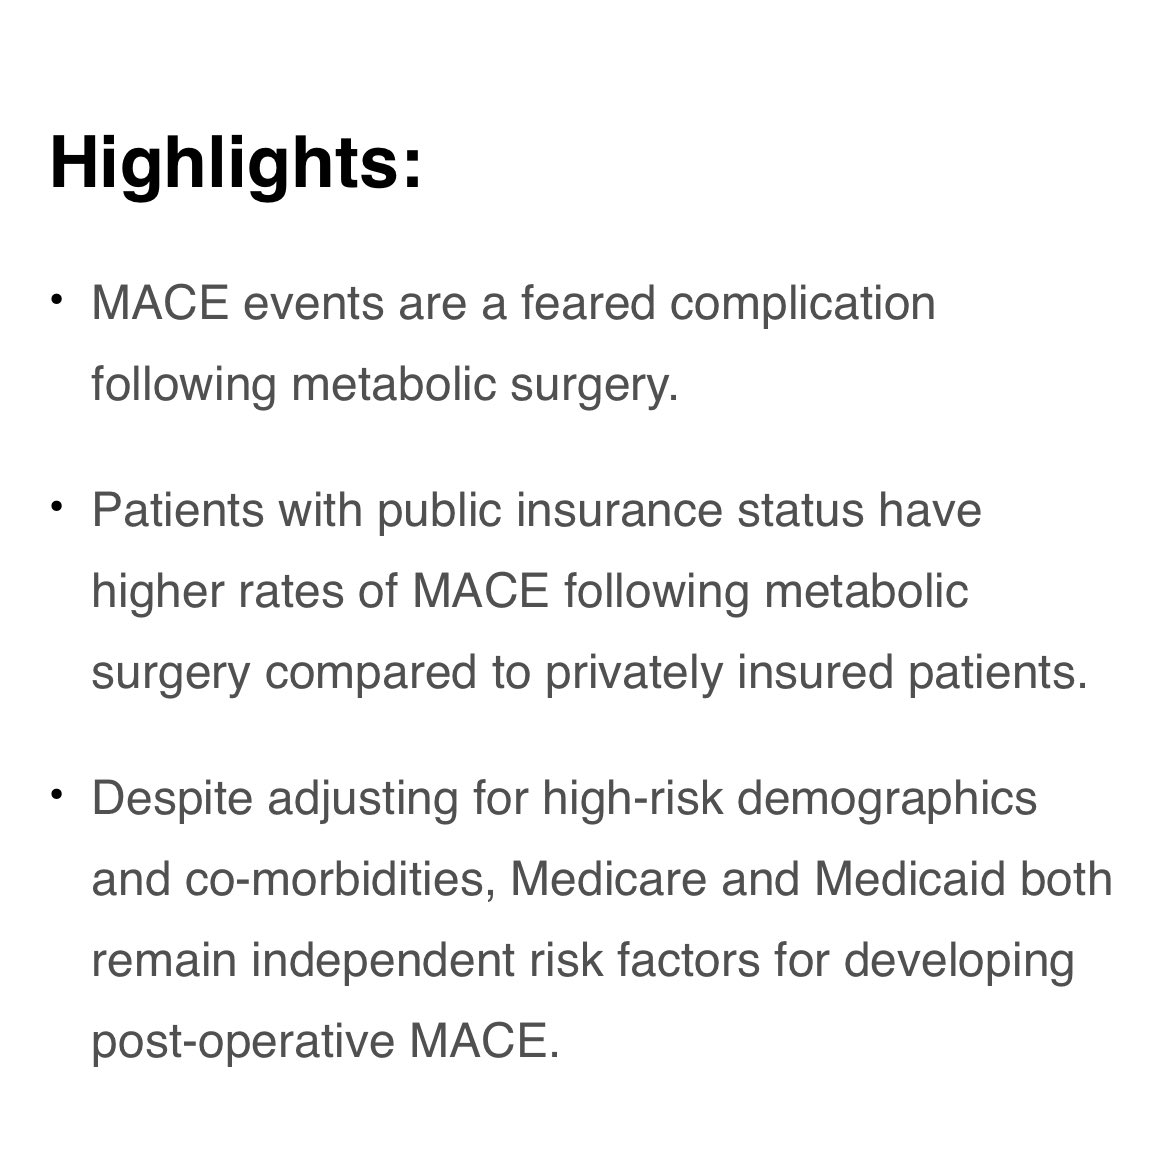 📣 Now IN PRESS ⚠️ Patients with public insurance have ⬆️ rates of MACE following #BariatricSurgery 📈 Incidence of MACE was higher in both Medicare (0.75% vs 0.11% p<0.001) and Medicaid (0.15% vs. 0.11% p<0.001) groups compared to privately insured bit.ly/44BBz20